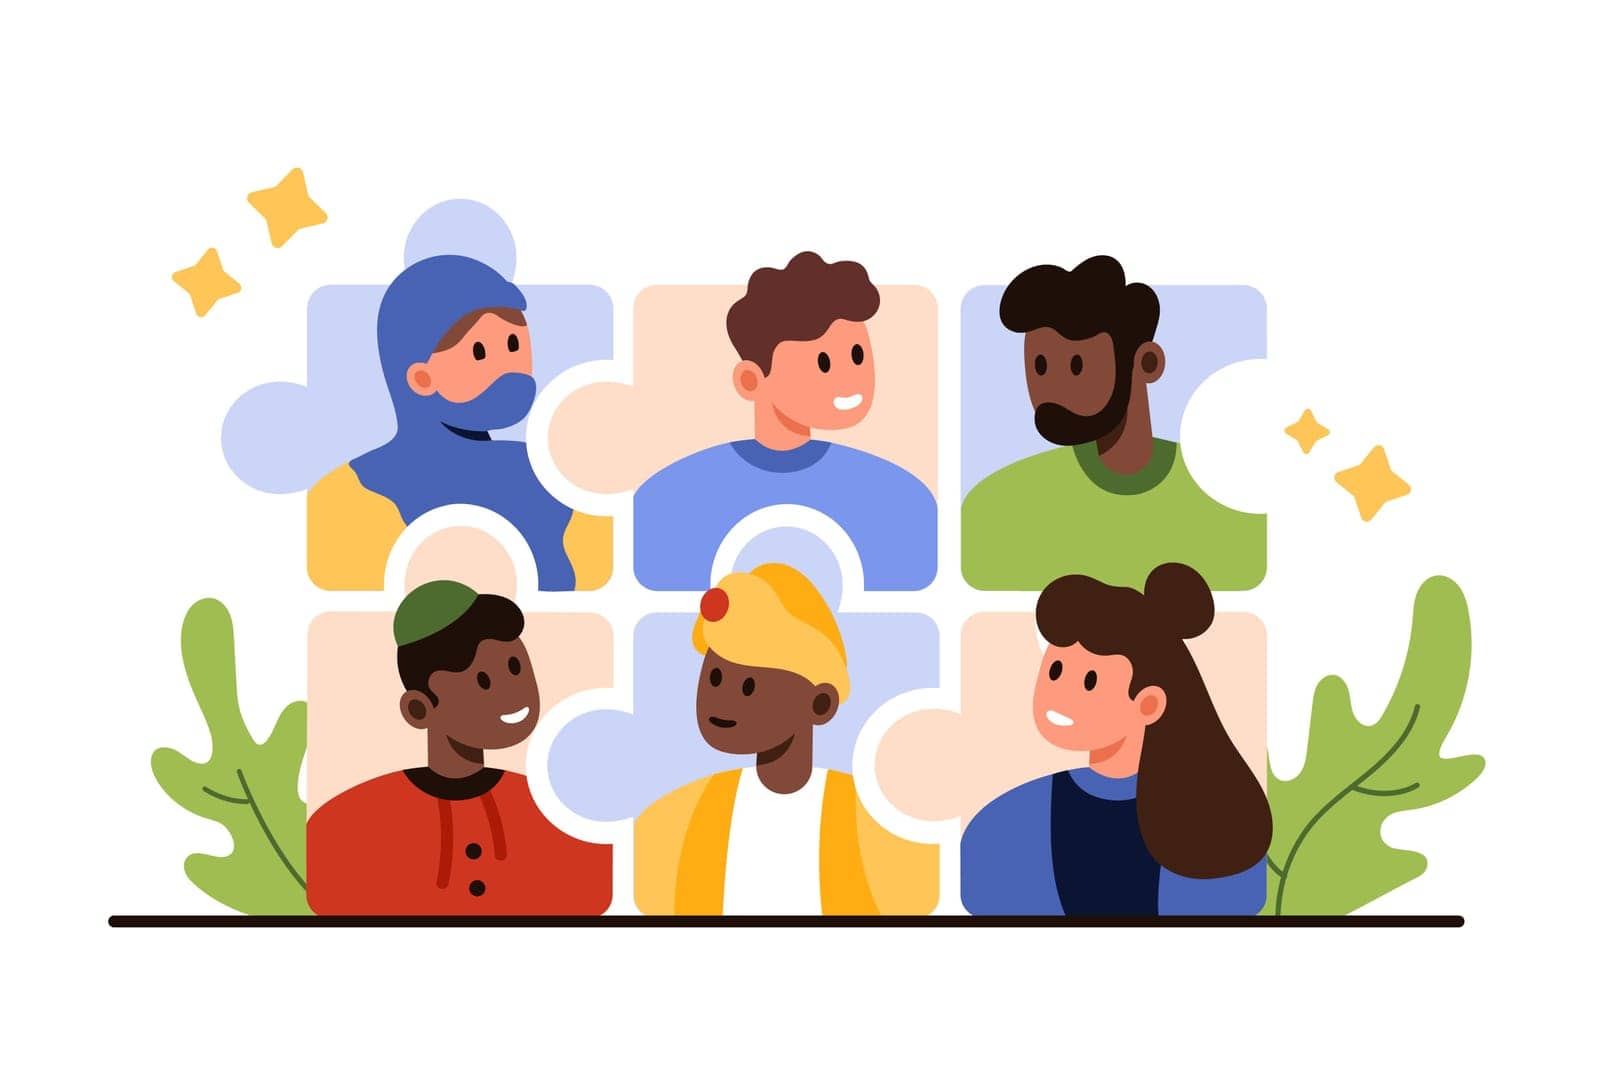 Diversity in recruitment, employment. Multicultural and multinational talent employees inside group of connected puzzles, team building from people of different ethnicity cartoon vector illustration